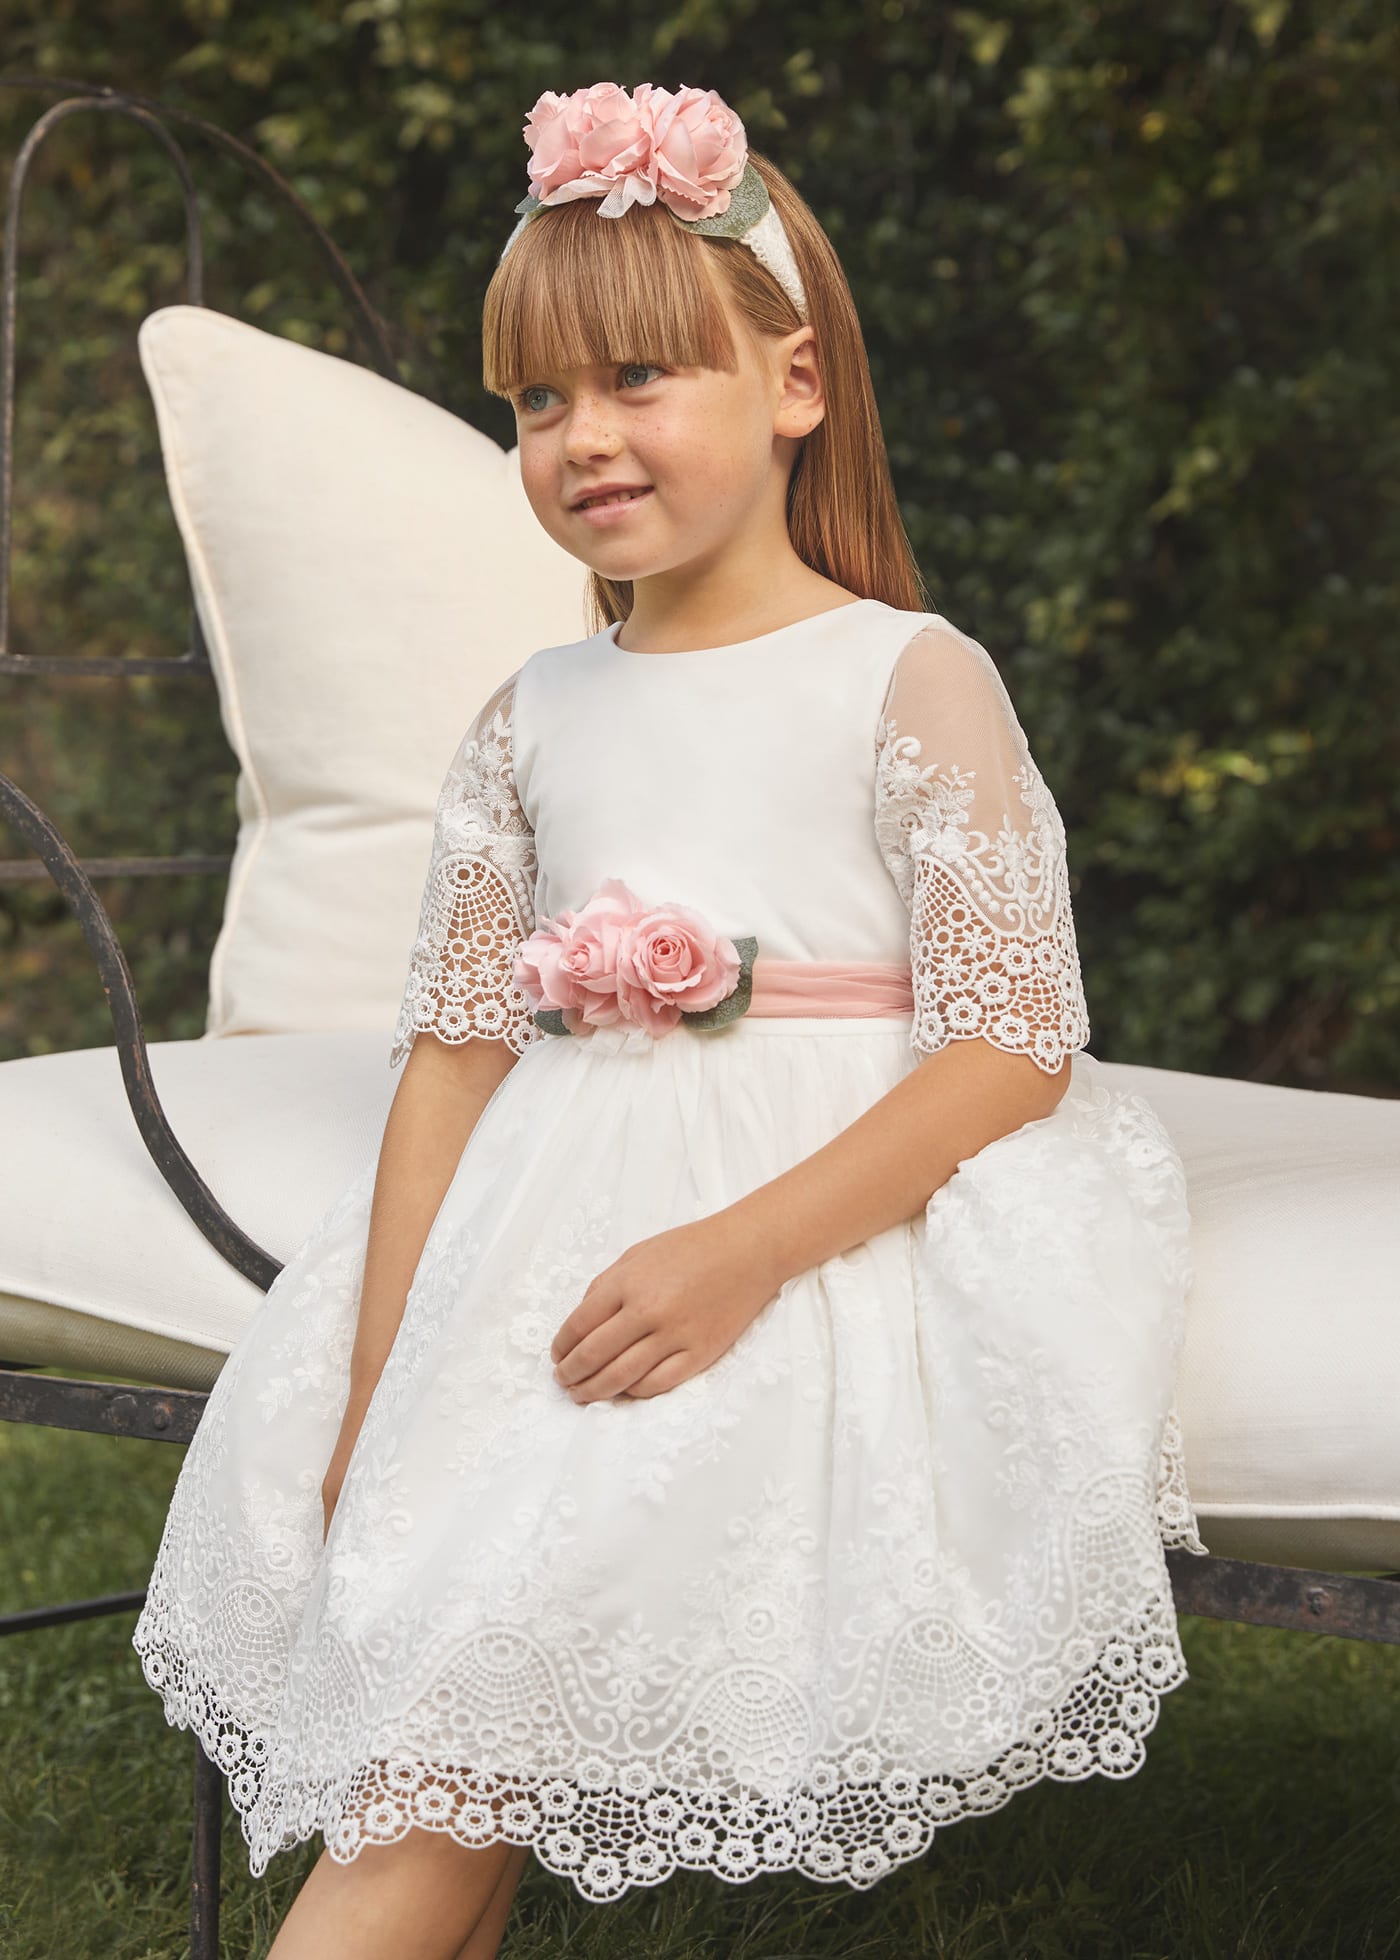 Girl Tulle Embroidered Guipure Dress